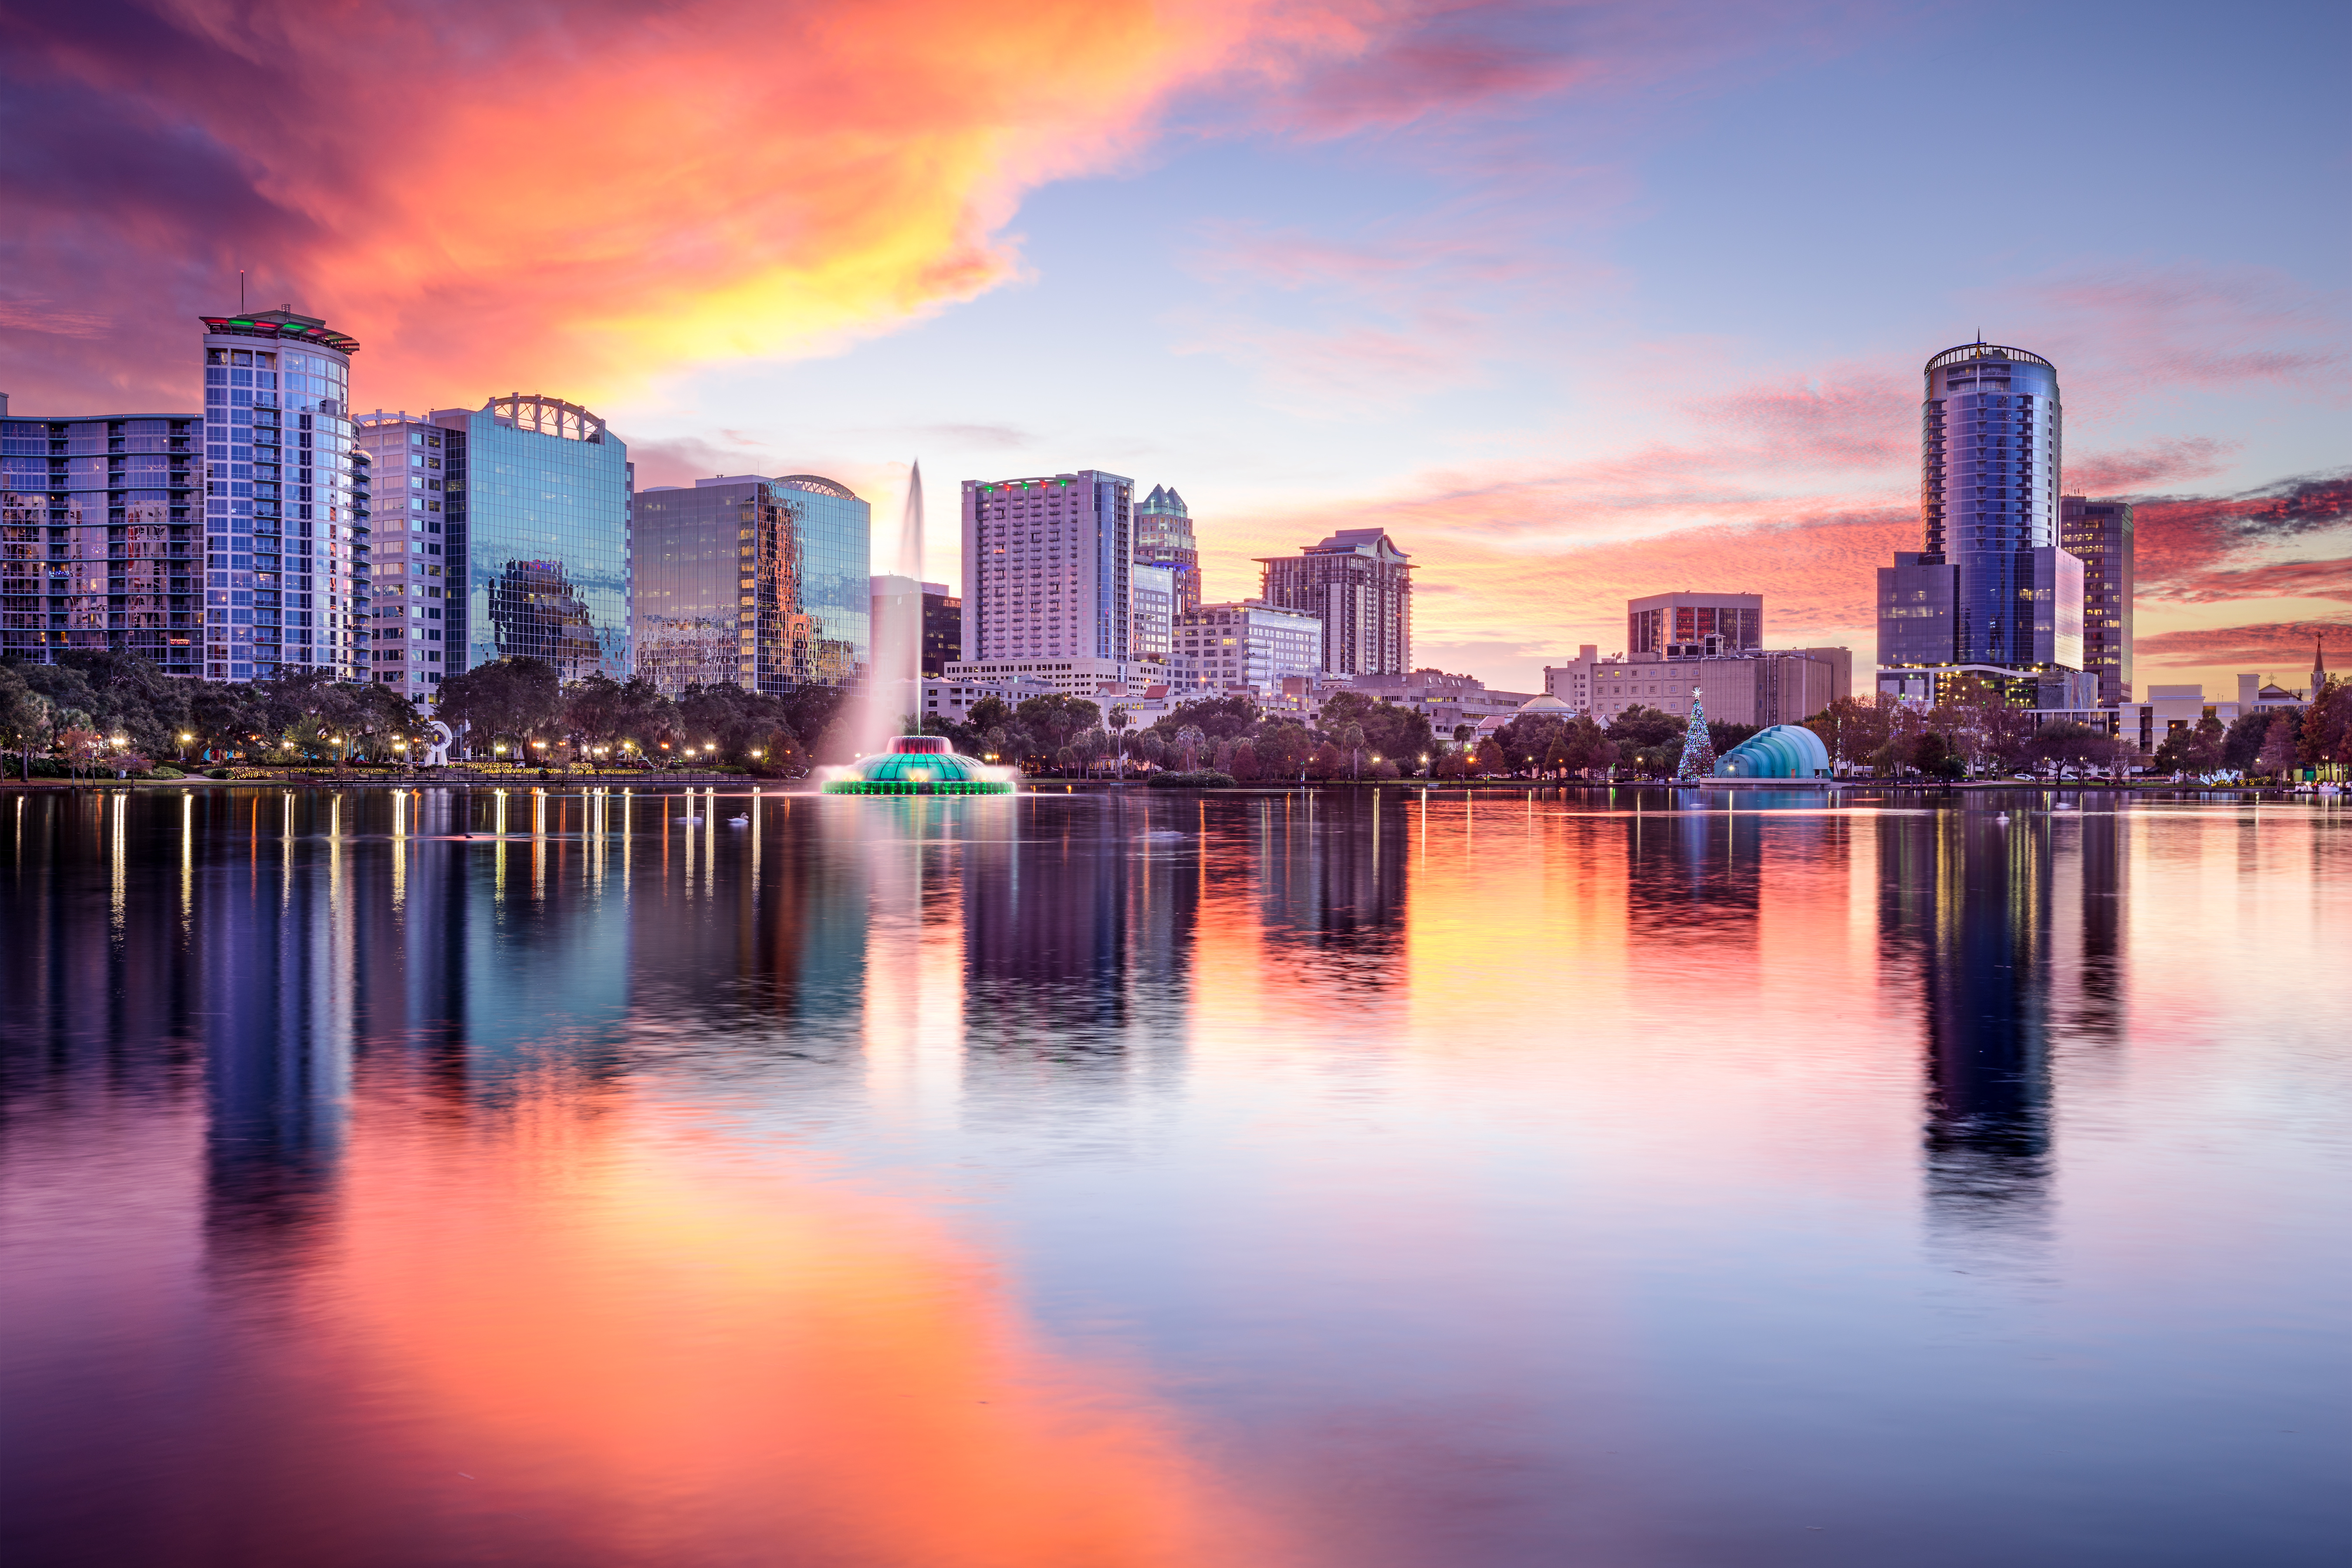 A skyline of Orlando, Florida at sunset. There is a row of buildings with a purple and orange sunset above. The sunset reflects onto a lake, which is front of the buildings in the foreground.